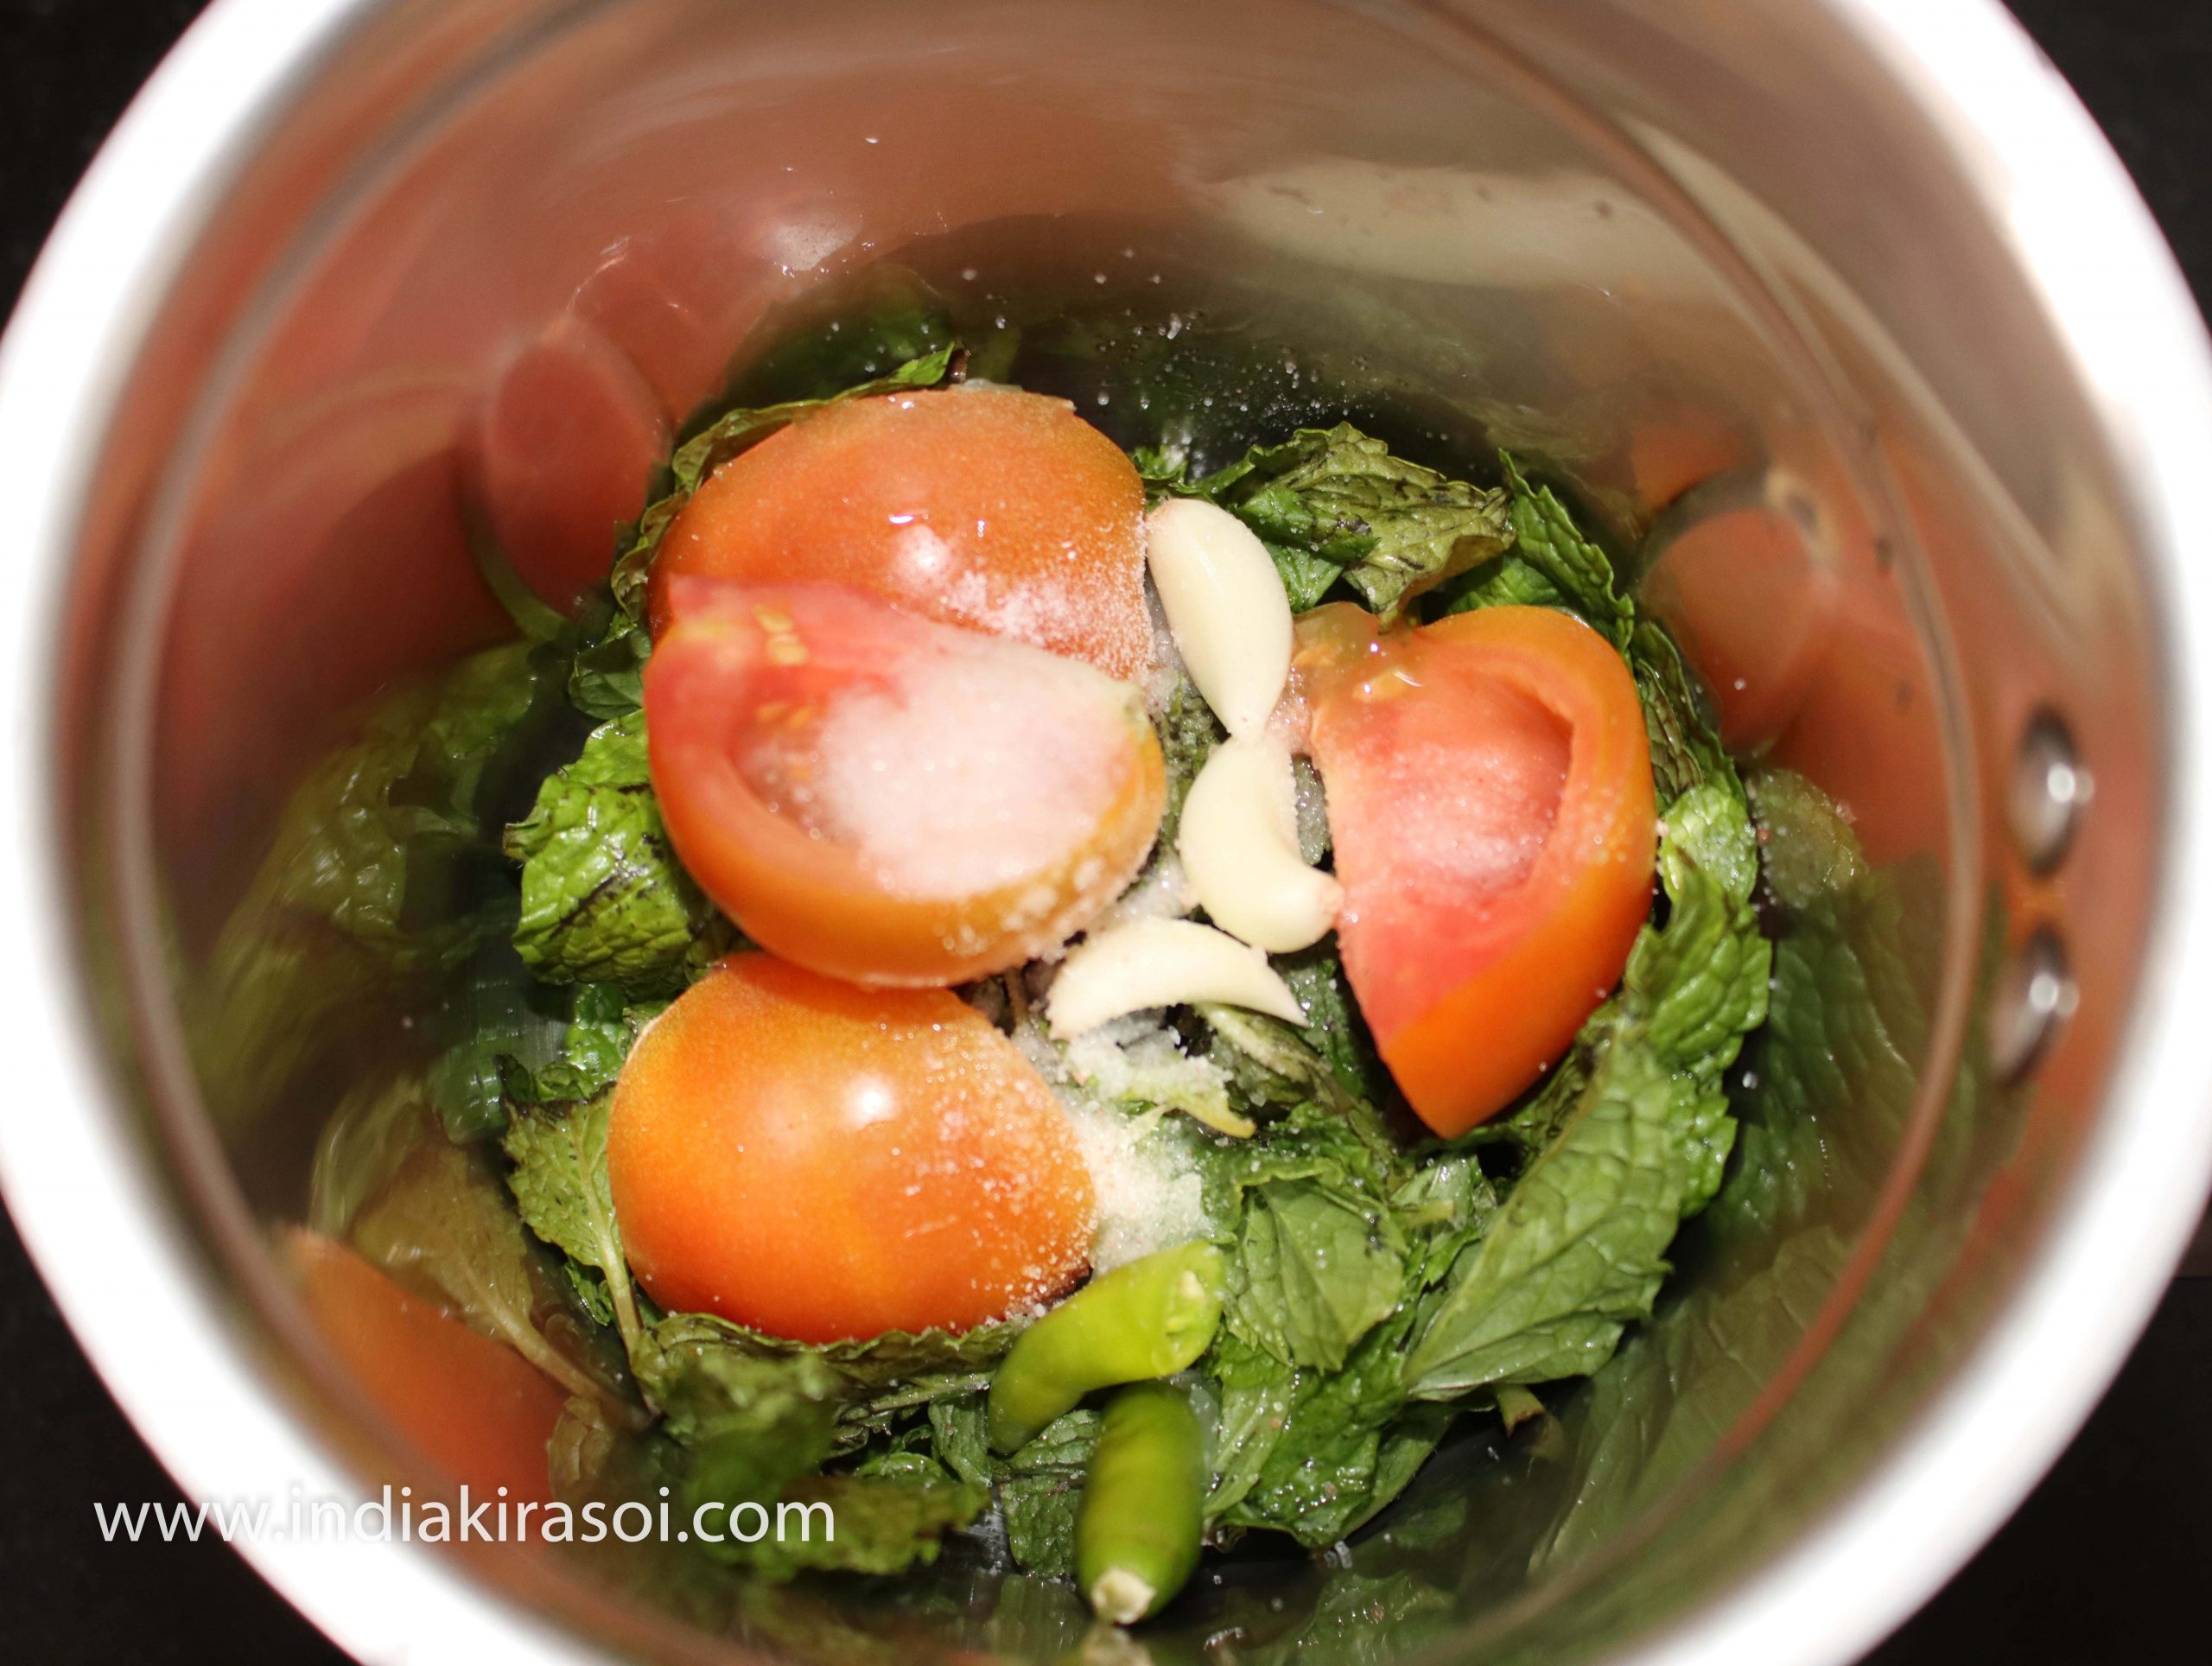 Cut the tomatoes and put in the jar of the mixer grinder, add green chili, mint, lemon juice, and salt to taste. You can also use black salt if you want.